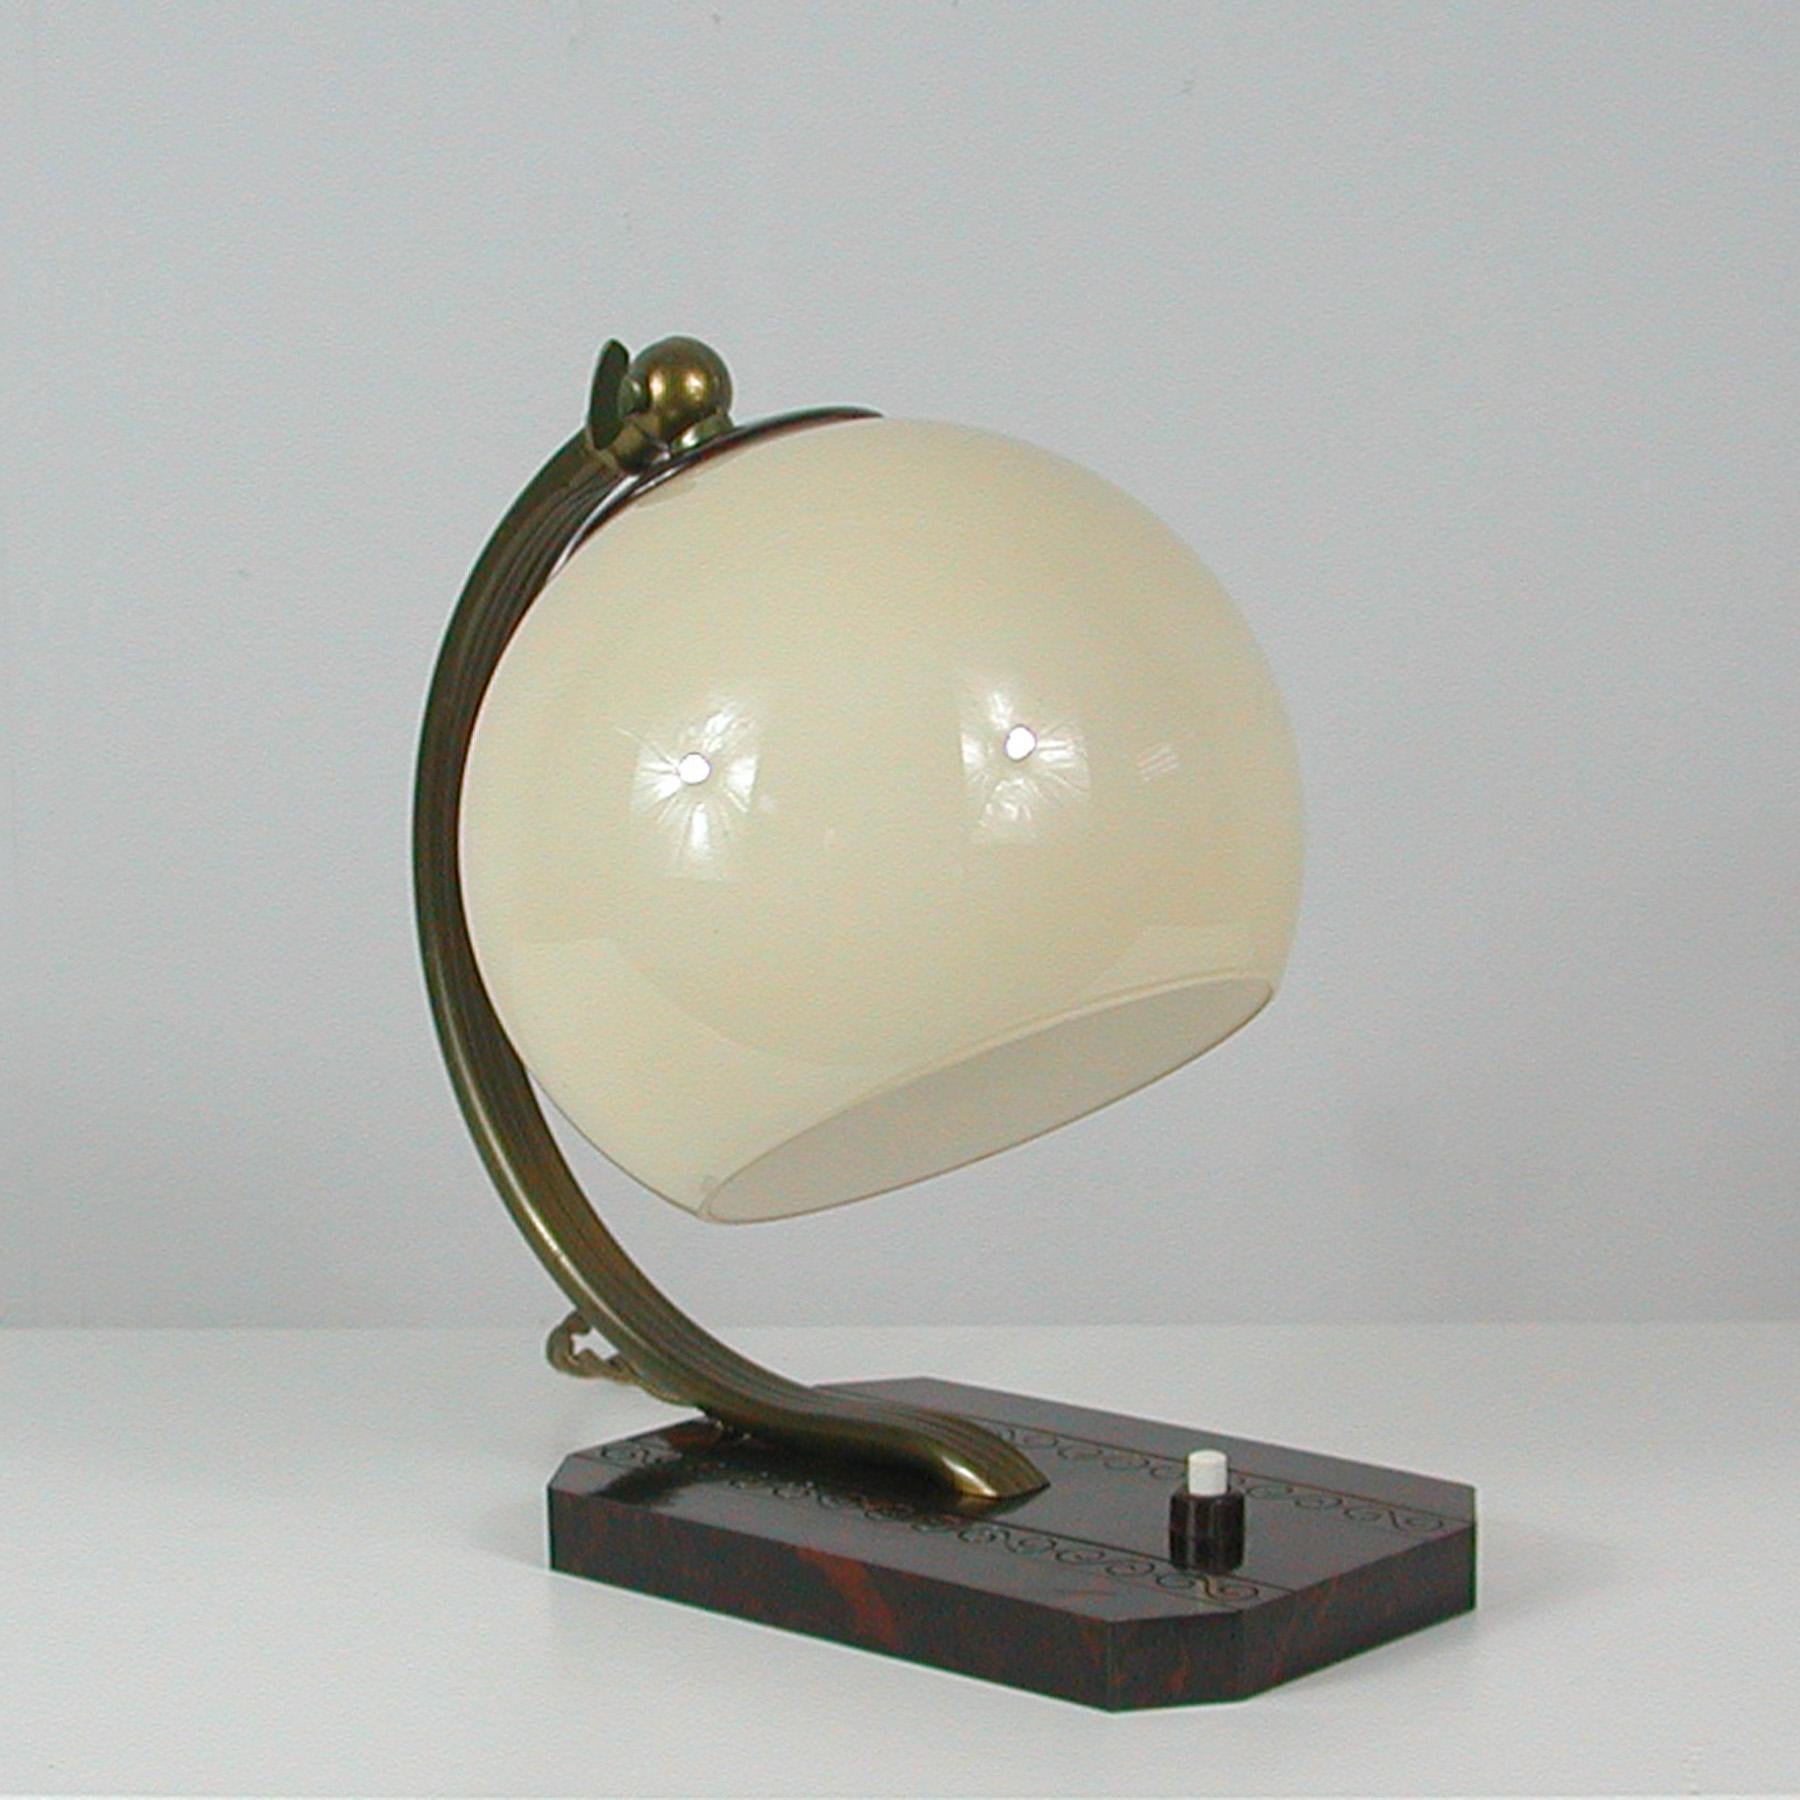 This unusual vintage table or bedside lamp was made in Germany in the 1930s-1940s during the Bauhaus period. It is made of bronzed brass, has got an adjustable lamp shade in ivory colored opaline glass and a brown marbled bakelite base. Original